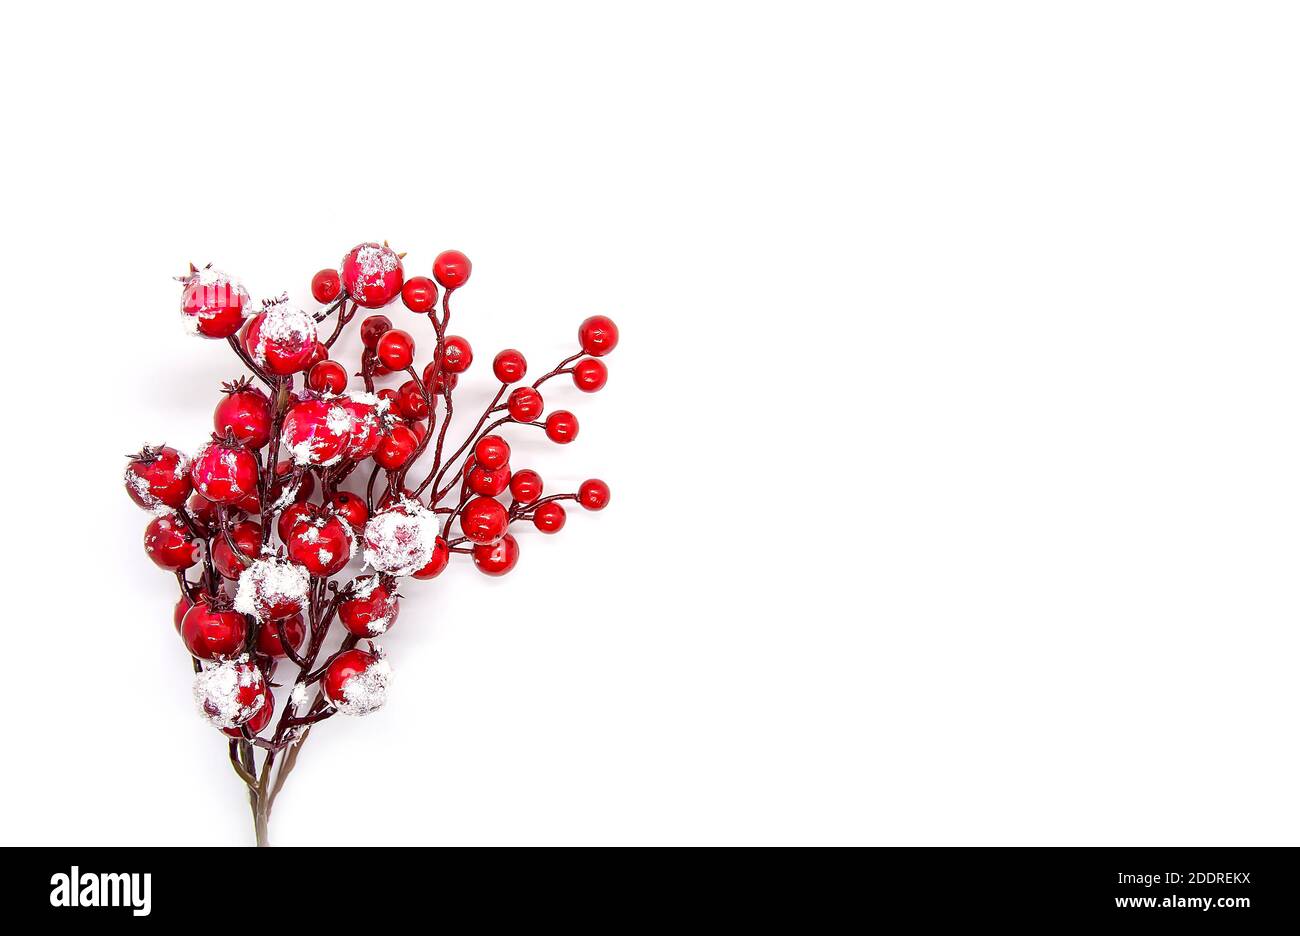 Festive New Year or Christmas background with red holly plant berries. Stock Photo